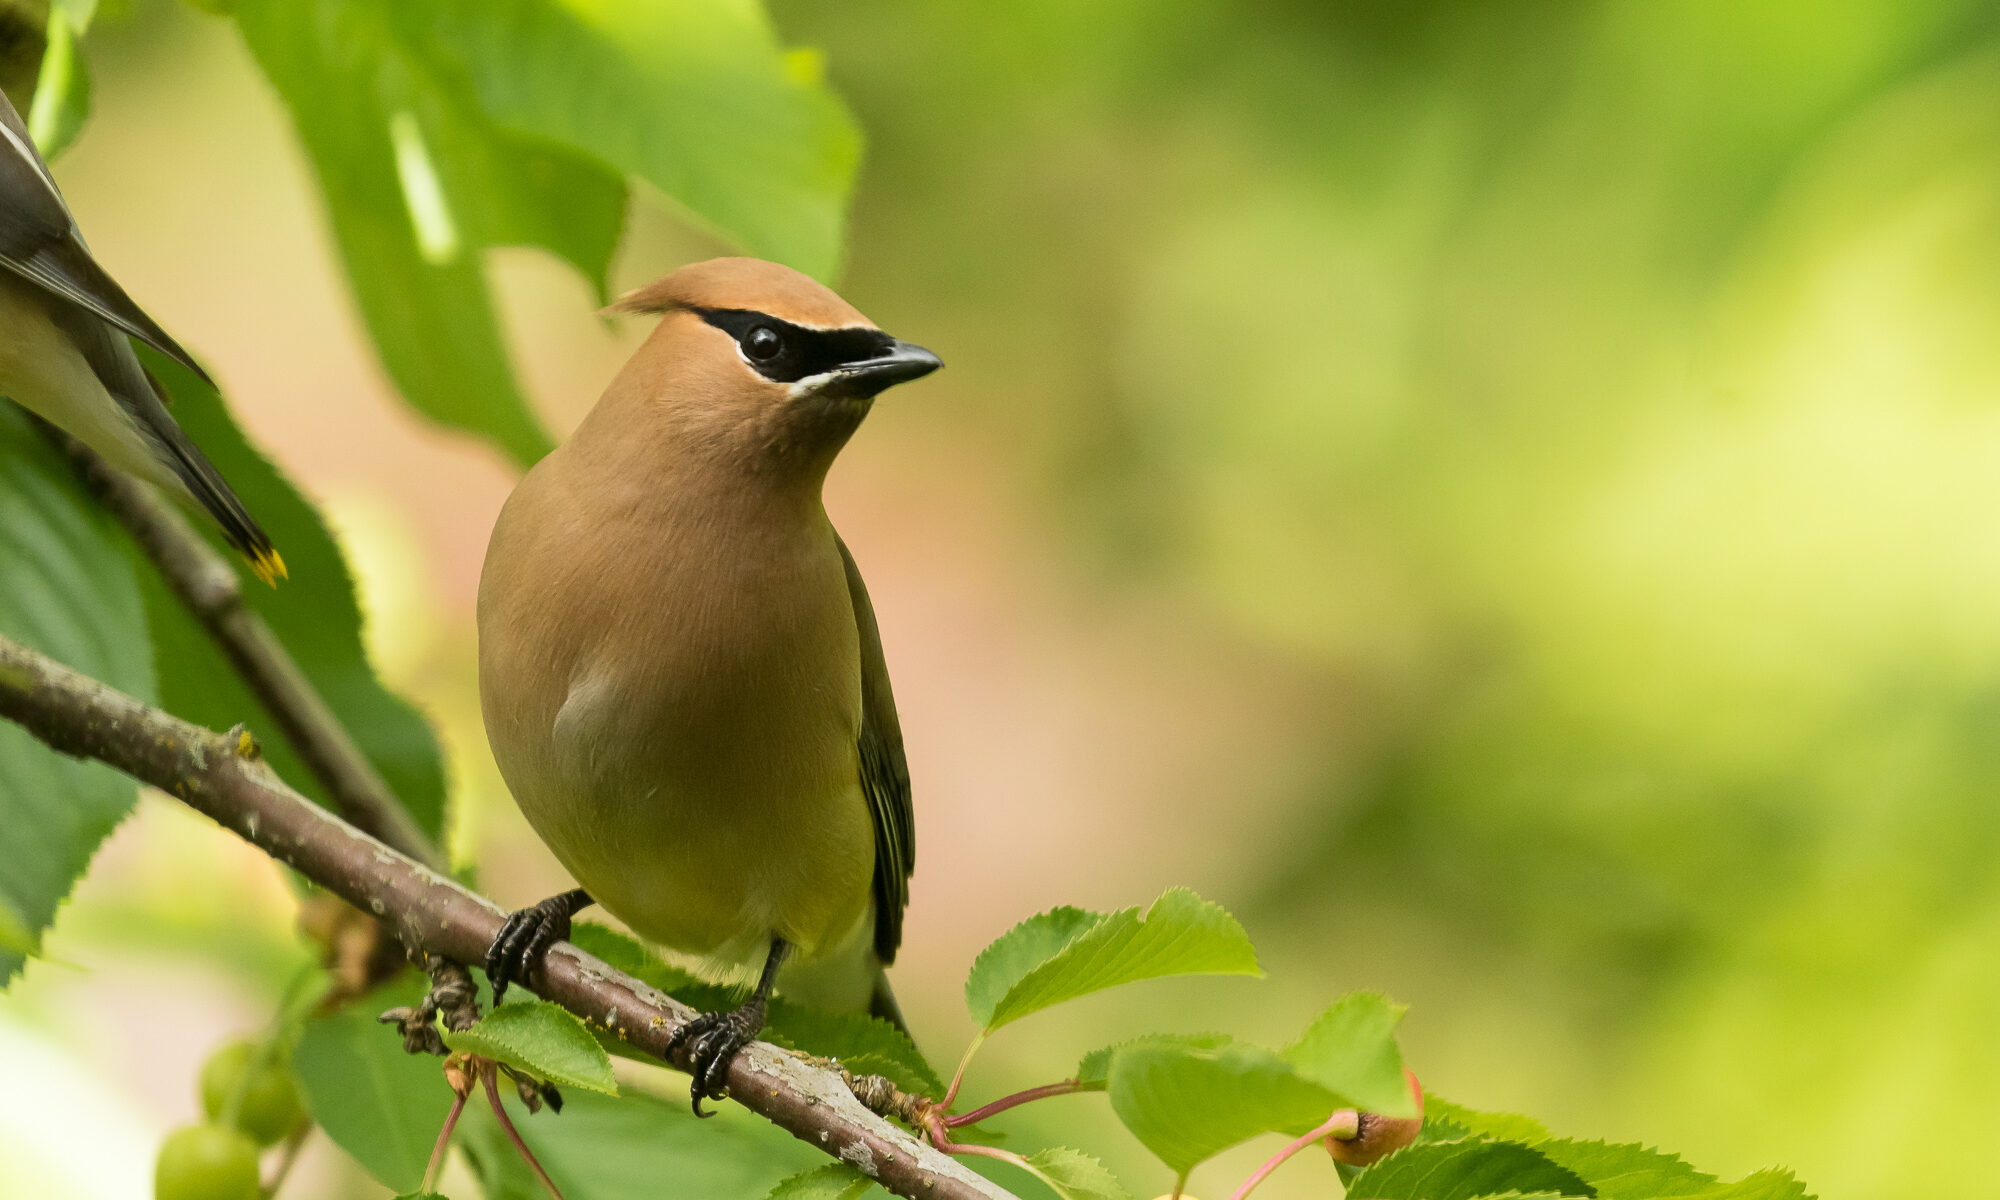 A cedar waxwing perches on a branch of a cherry tree, Vancouver, WA.